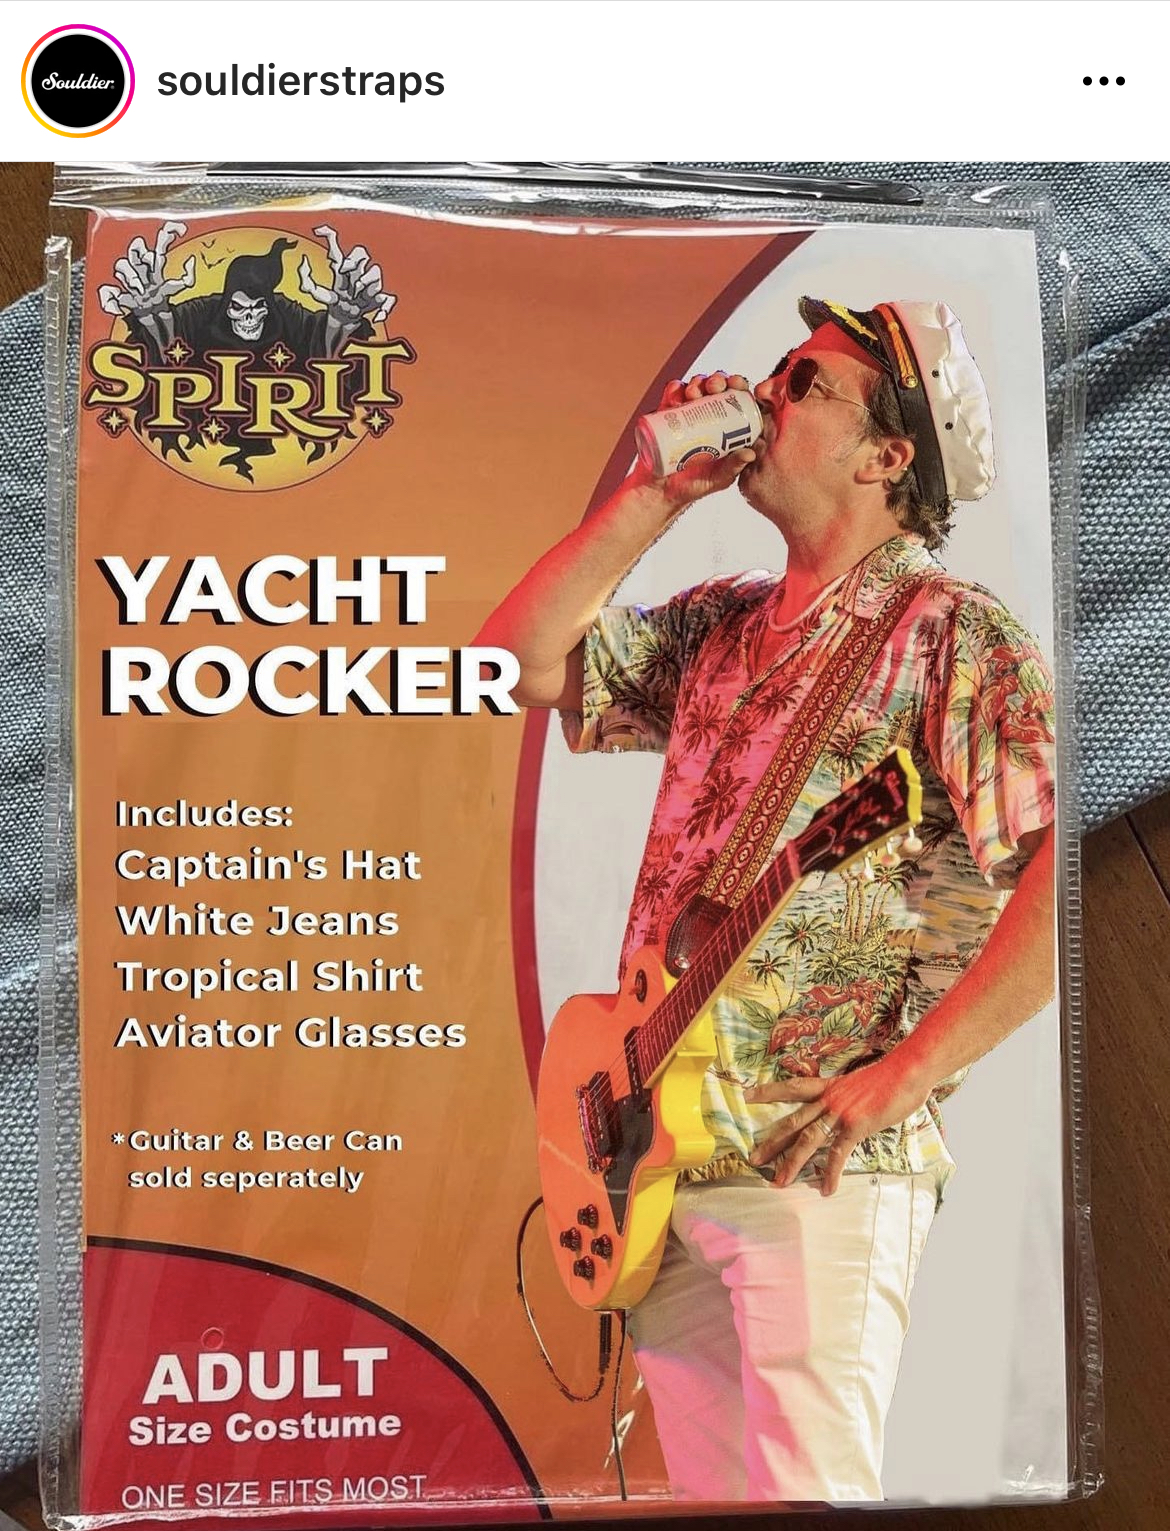 Costume Memes - spirit halloween - der souldierstraps Spirit Yacht Rocker Includes Captain's Hat White Jeans Tropical Shirt Aviator Glasses Guitar & Beer Can sold seperately Adult Size Costume One Size Fits Most ... ToodFood